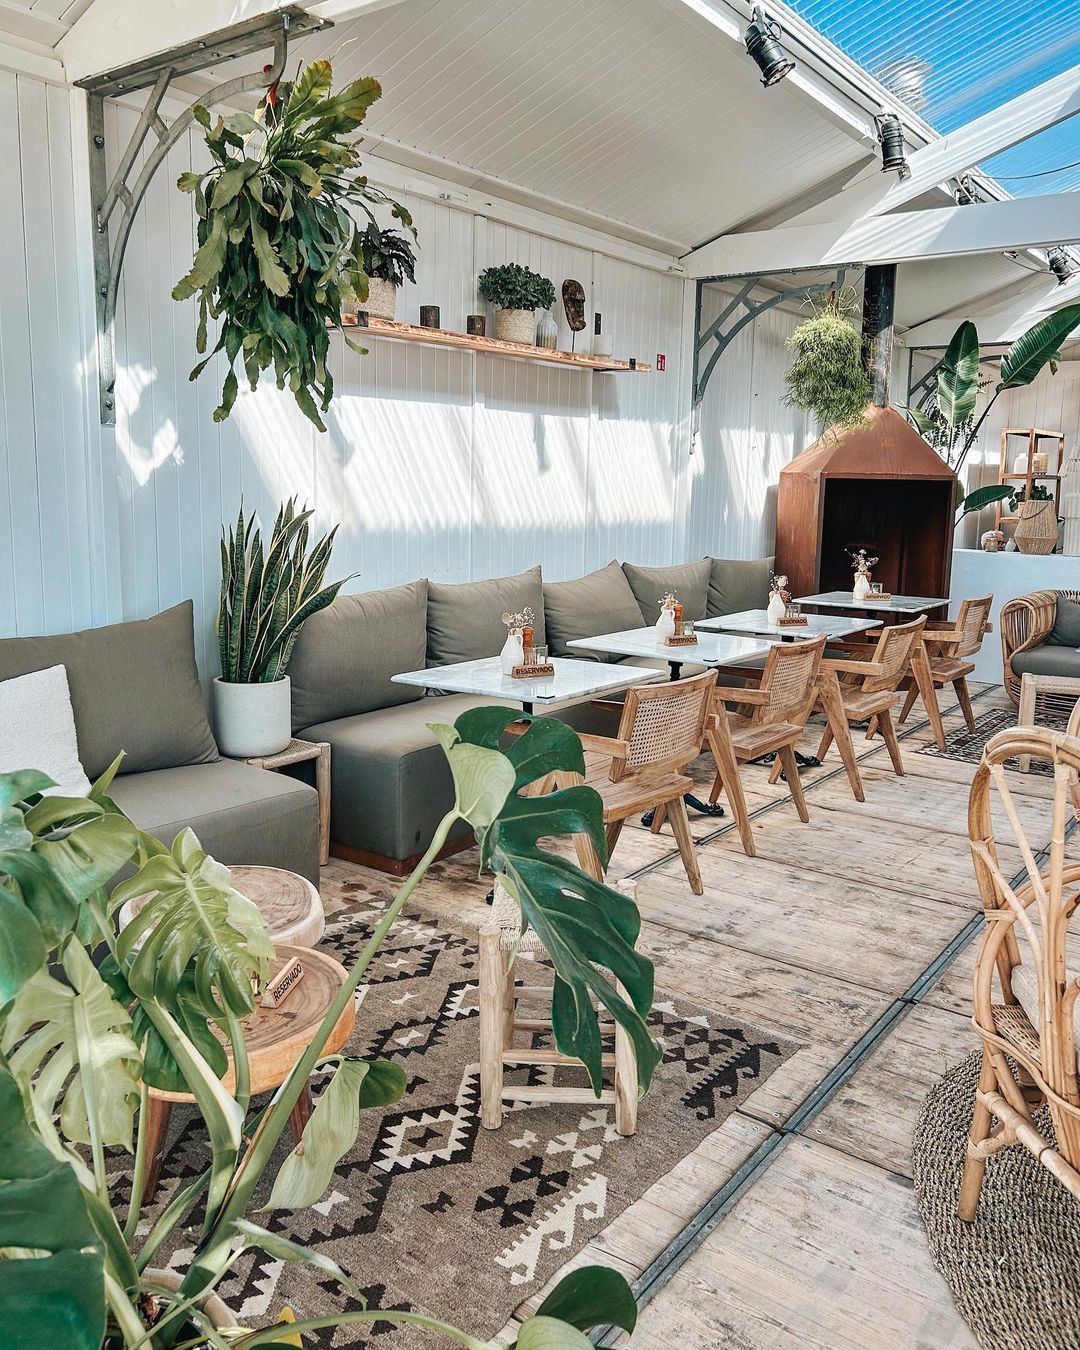 Bohemian vibes at Hippie Fish - Best Exotic Beach Clubs in Europe